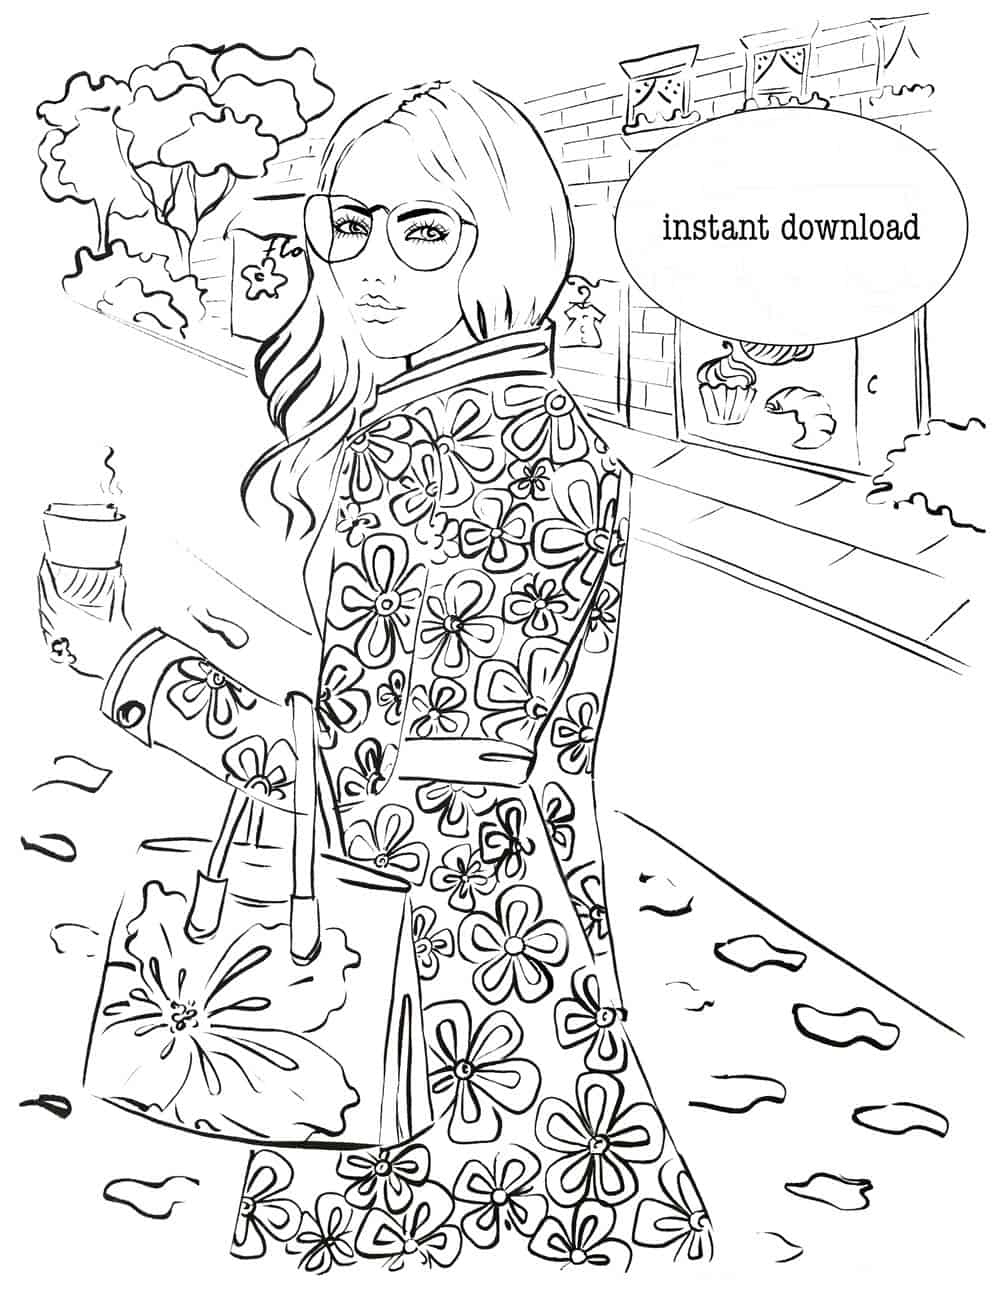 free coloring page, free printable coloring page